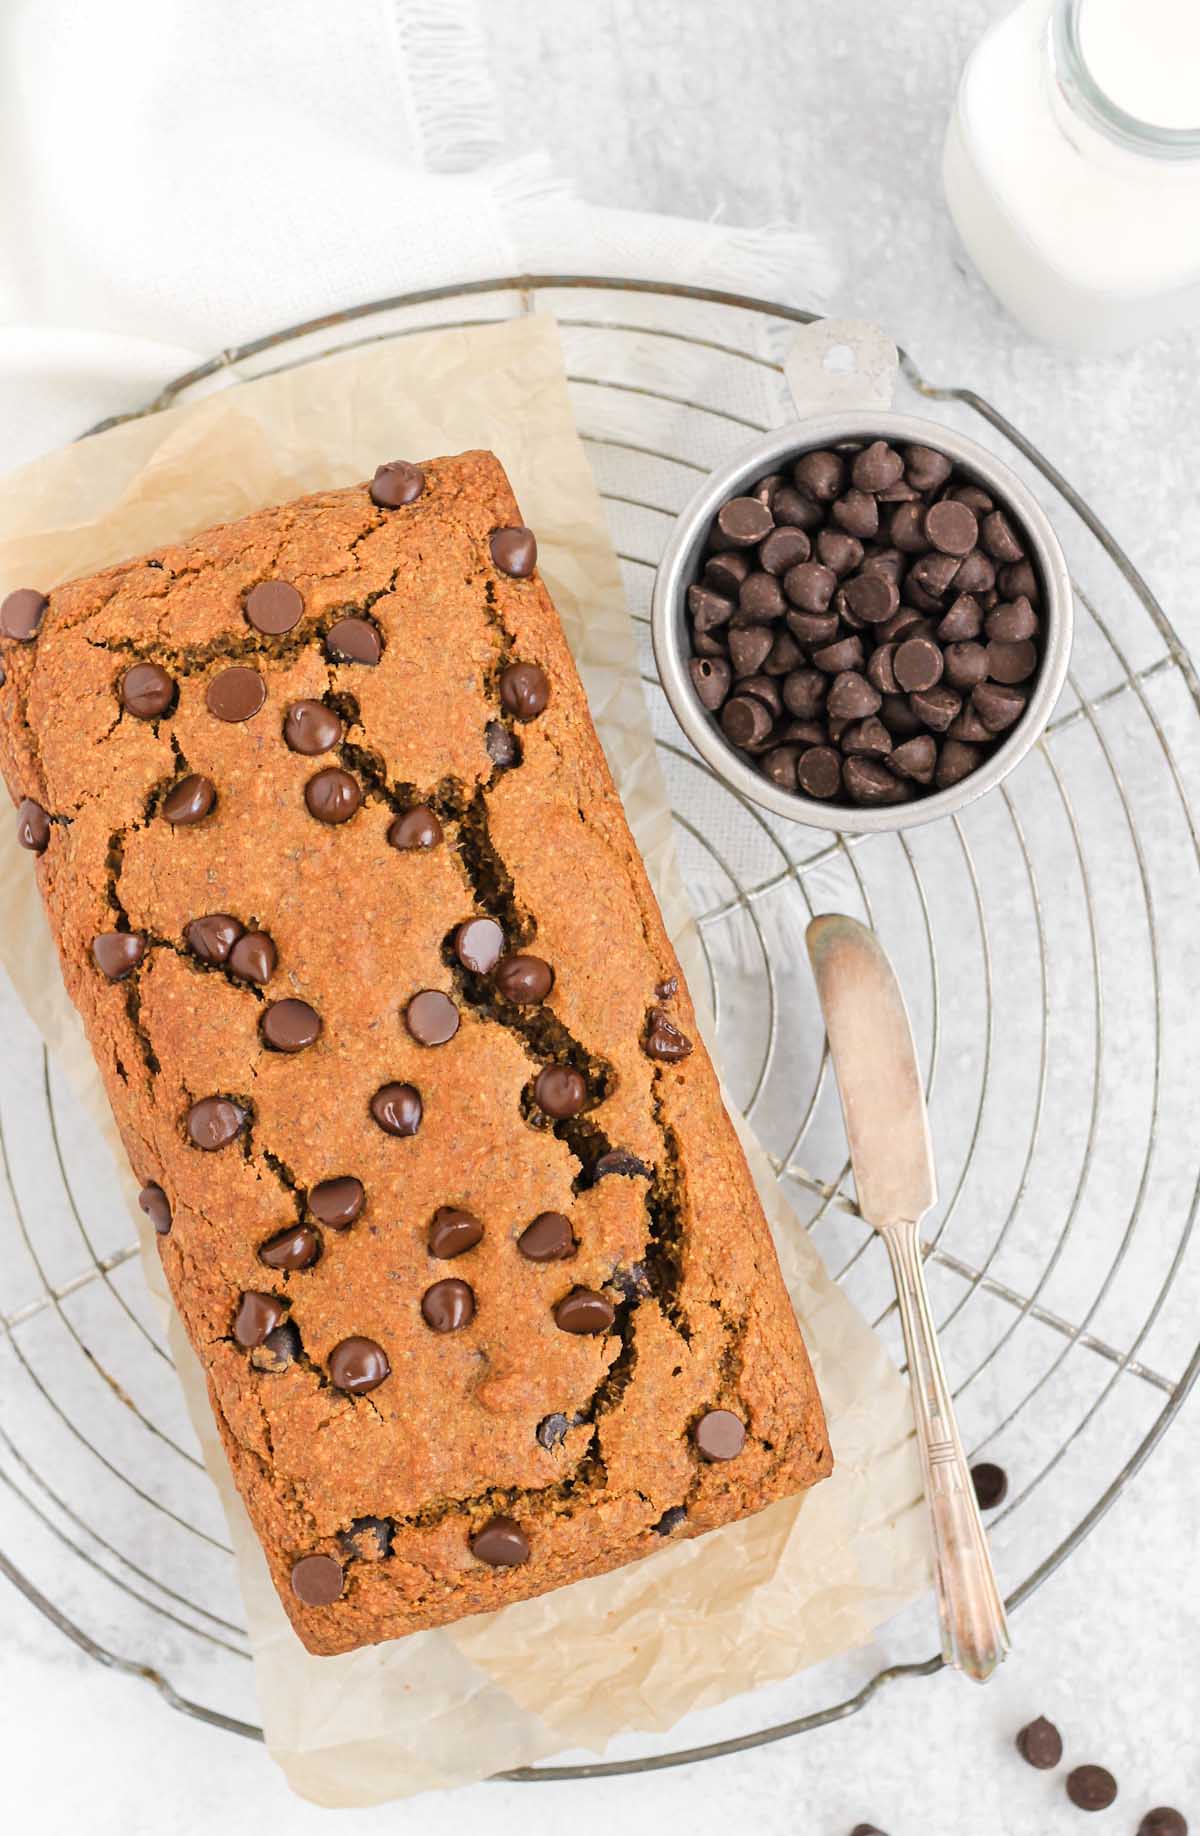 Gluten-free pumpkin chocolate chip loaf on a round wire cooling rack.